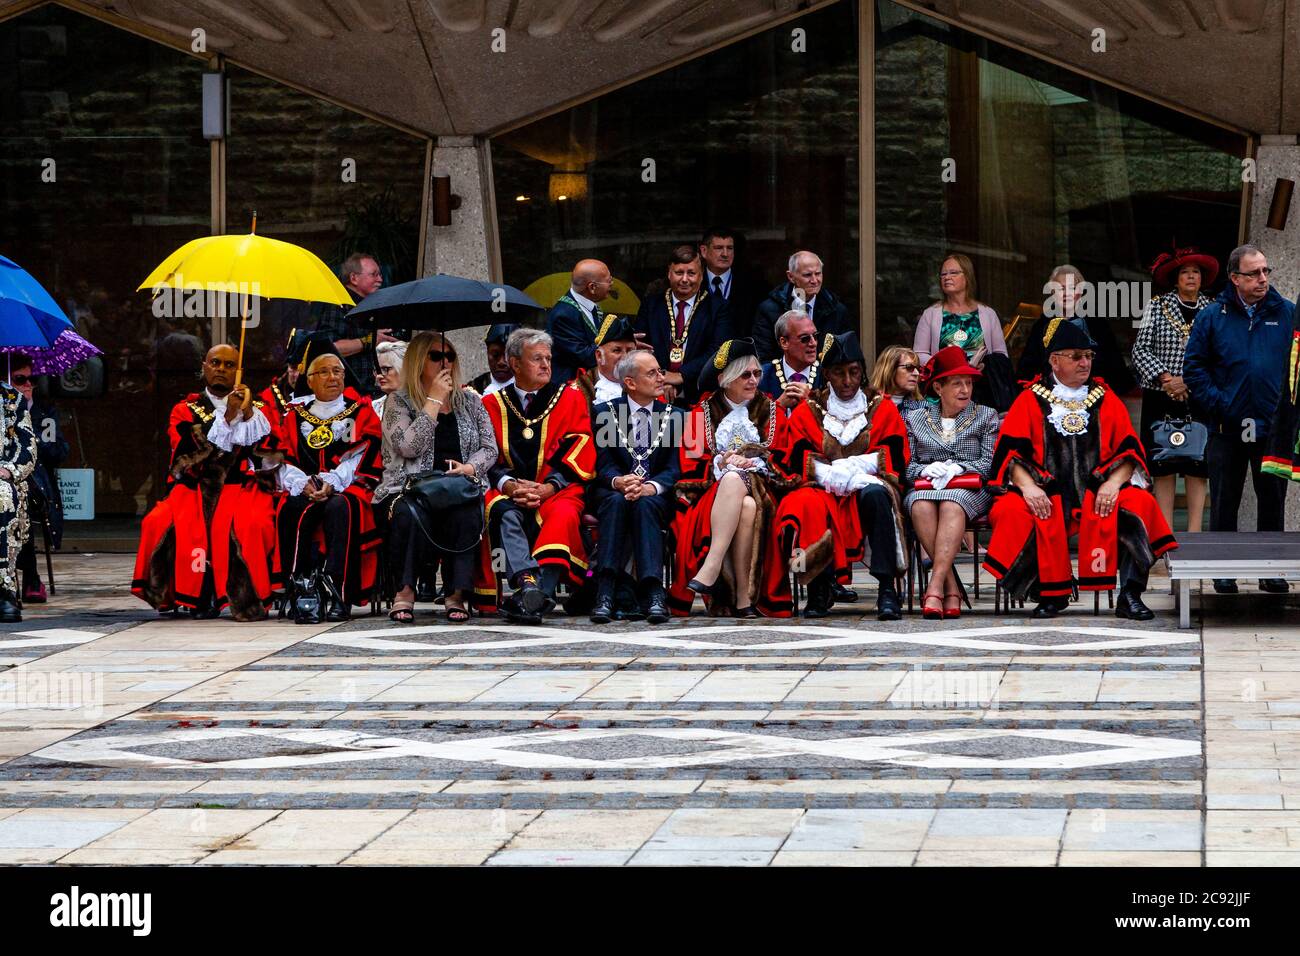 A Group Of London Mayors In Ceremonial Costume At The Pearly Kings and Queens Annual Harvest Festival Held At The Guildhall Yard, London, England. Stock Photo